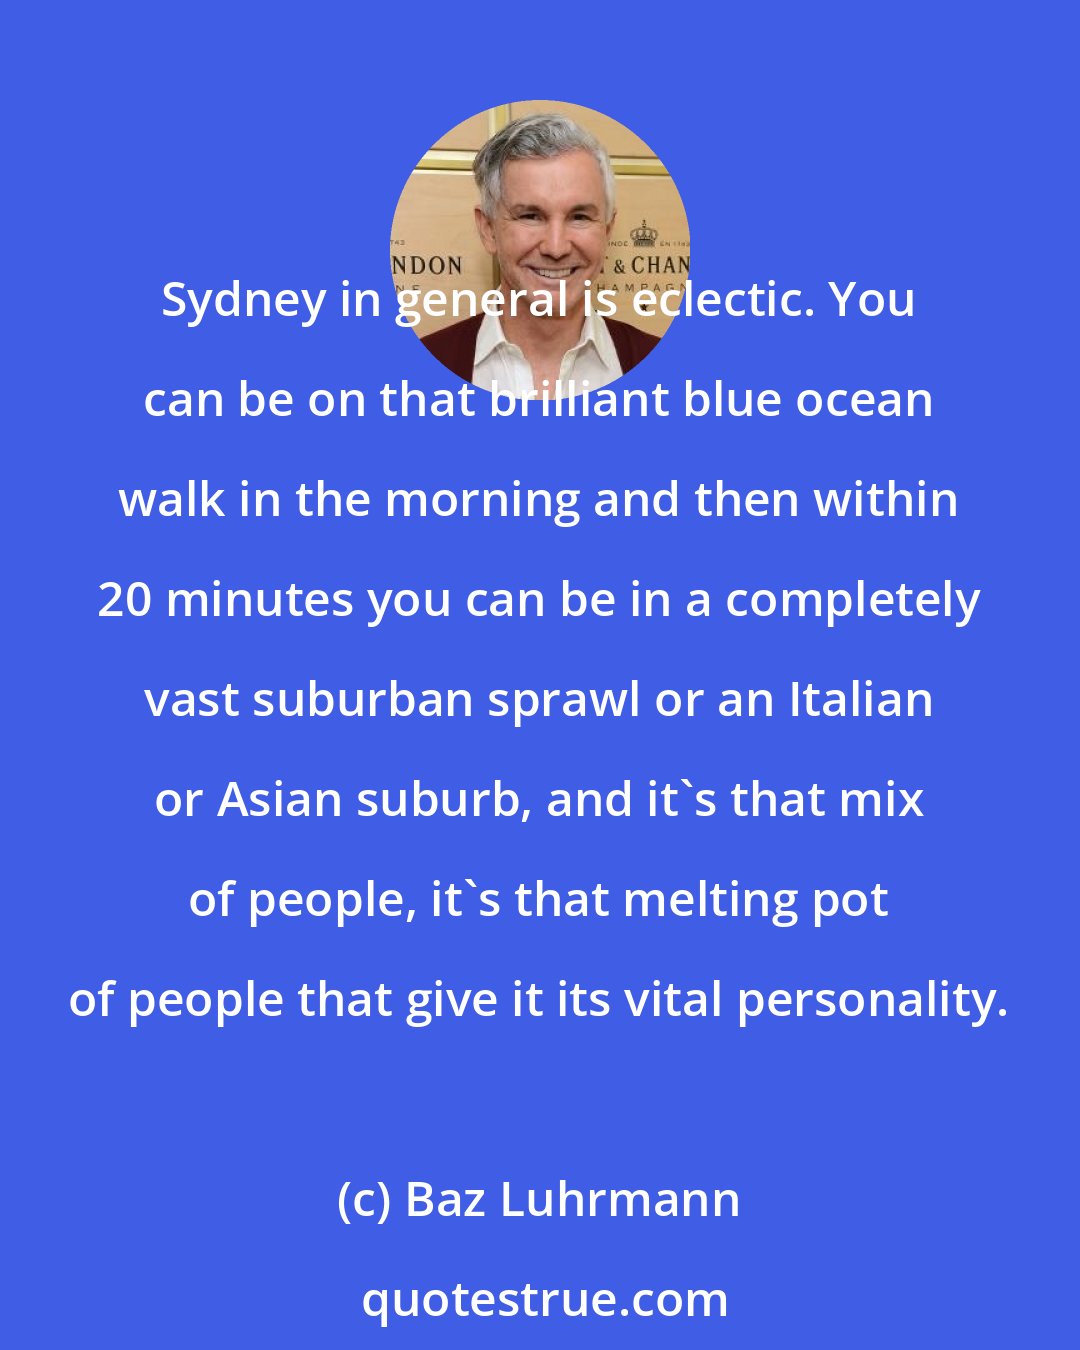 Baz Luhrmann: Sydney in general is eclectic. You can be on that brilliant blue ocean walk in the morning and then within 20 minutes you can be in a completely vast suburban sprawl or an Italian or Asian suburb, and it's that mix of people, it's that melting pot of people that give it its vital personality.